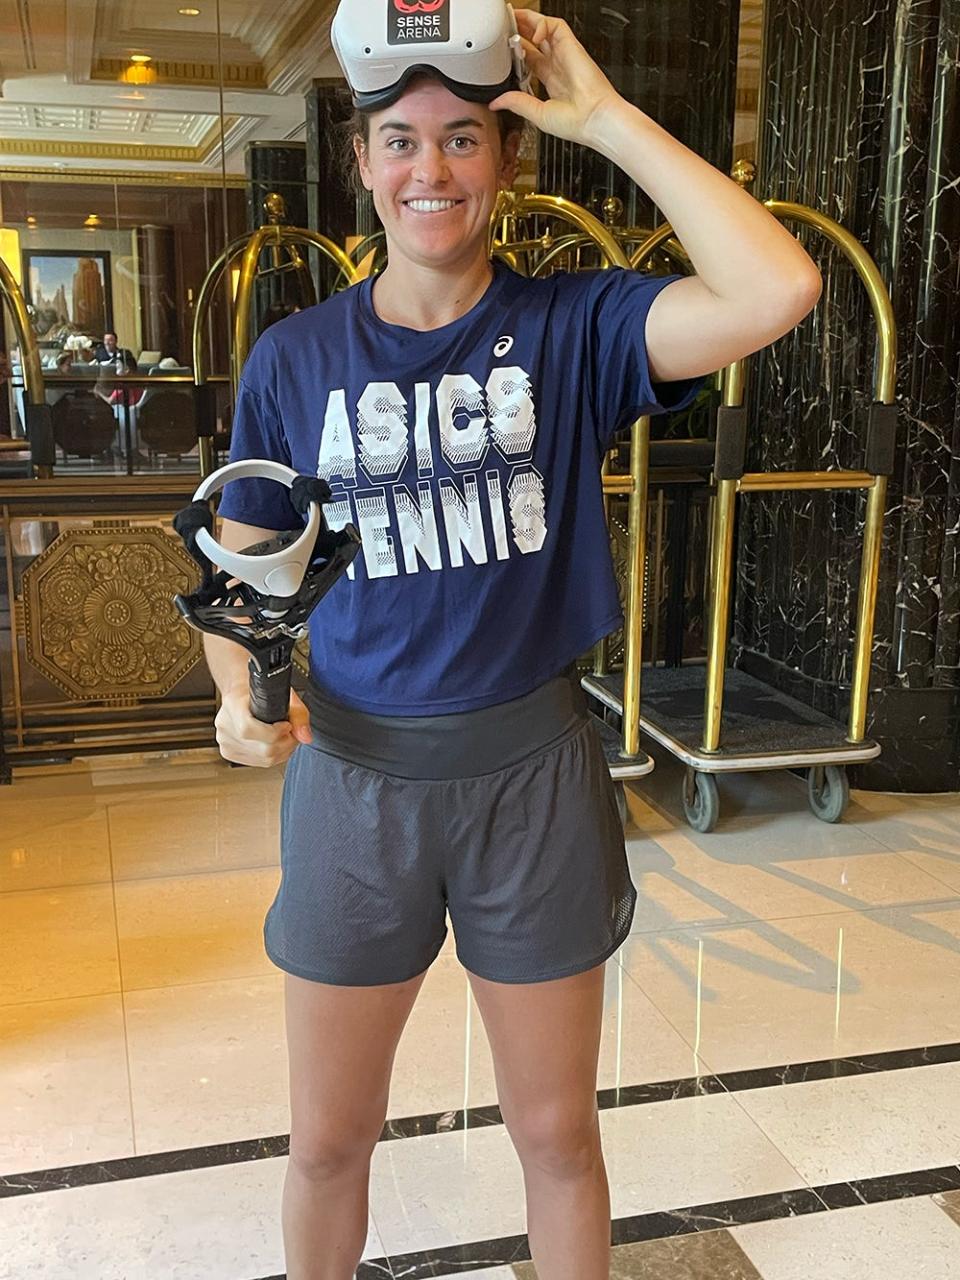 Jennifer Brady, who is trying to come back from injuries, says the VR platform has “allowed me to be able to submerse myself back in the tennis world and swing the racquet without hindering my rehab process.”